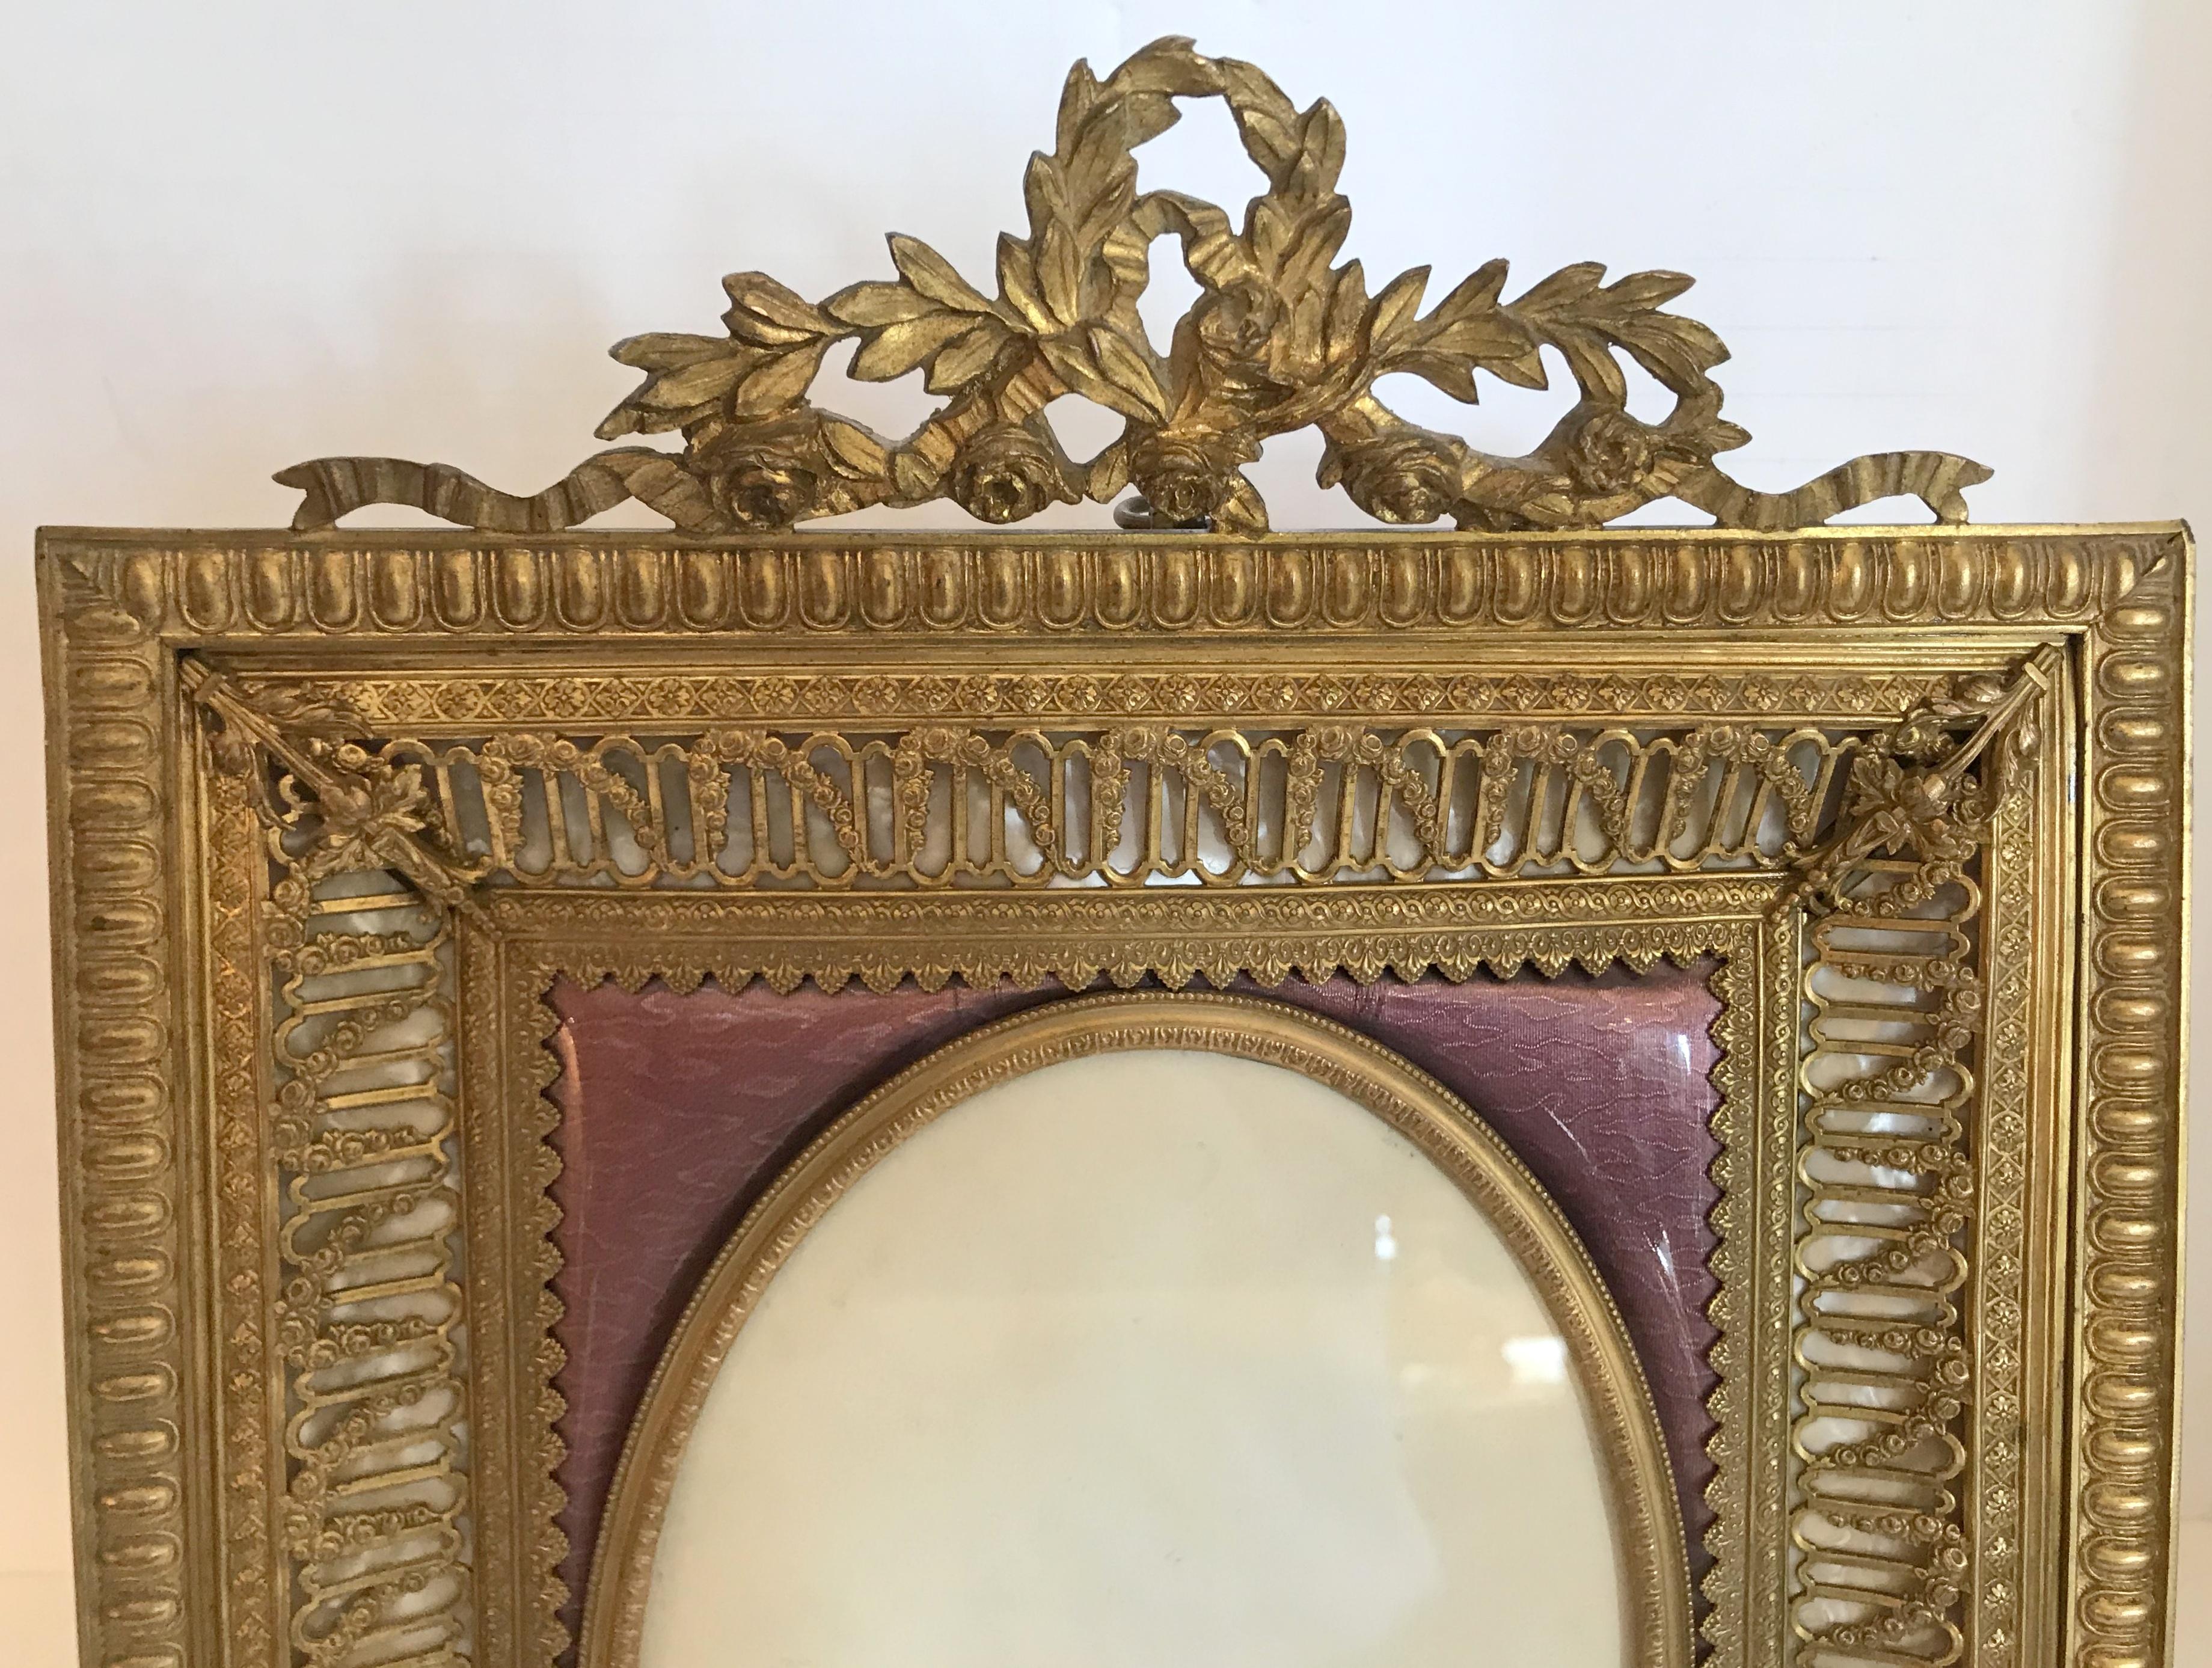 A fine French bronze ormolu purple Guilloche enamel and mother-of-pearl bow top. Floral and filigree large photo picture frame.
Measures: Actual frame is 10